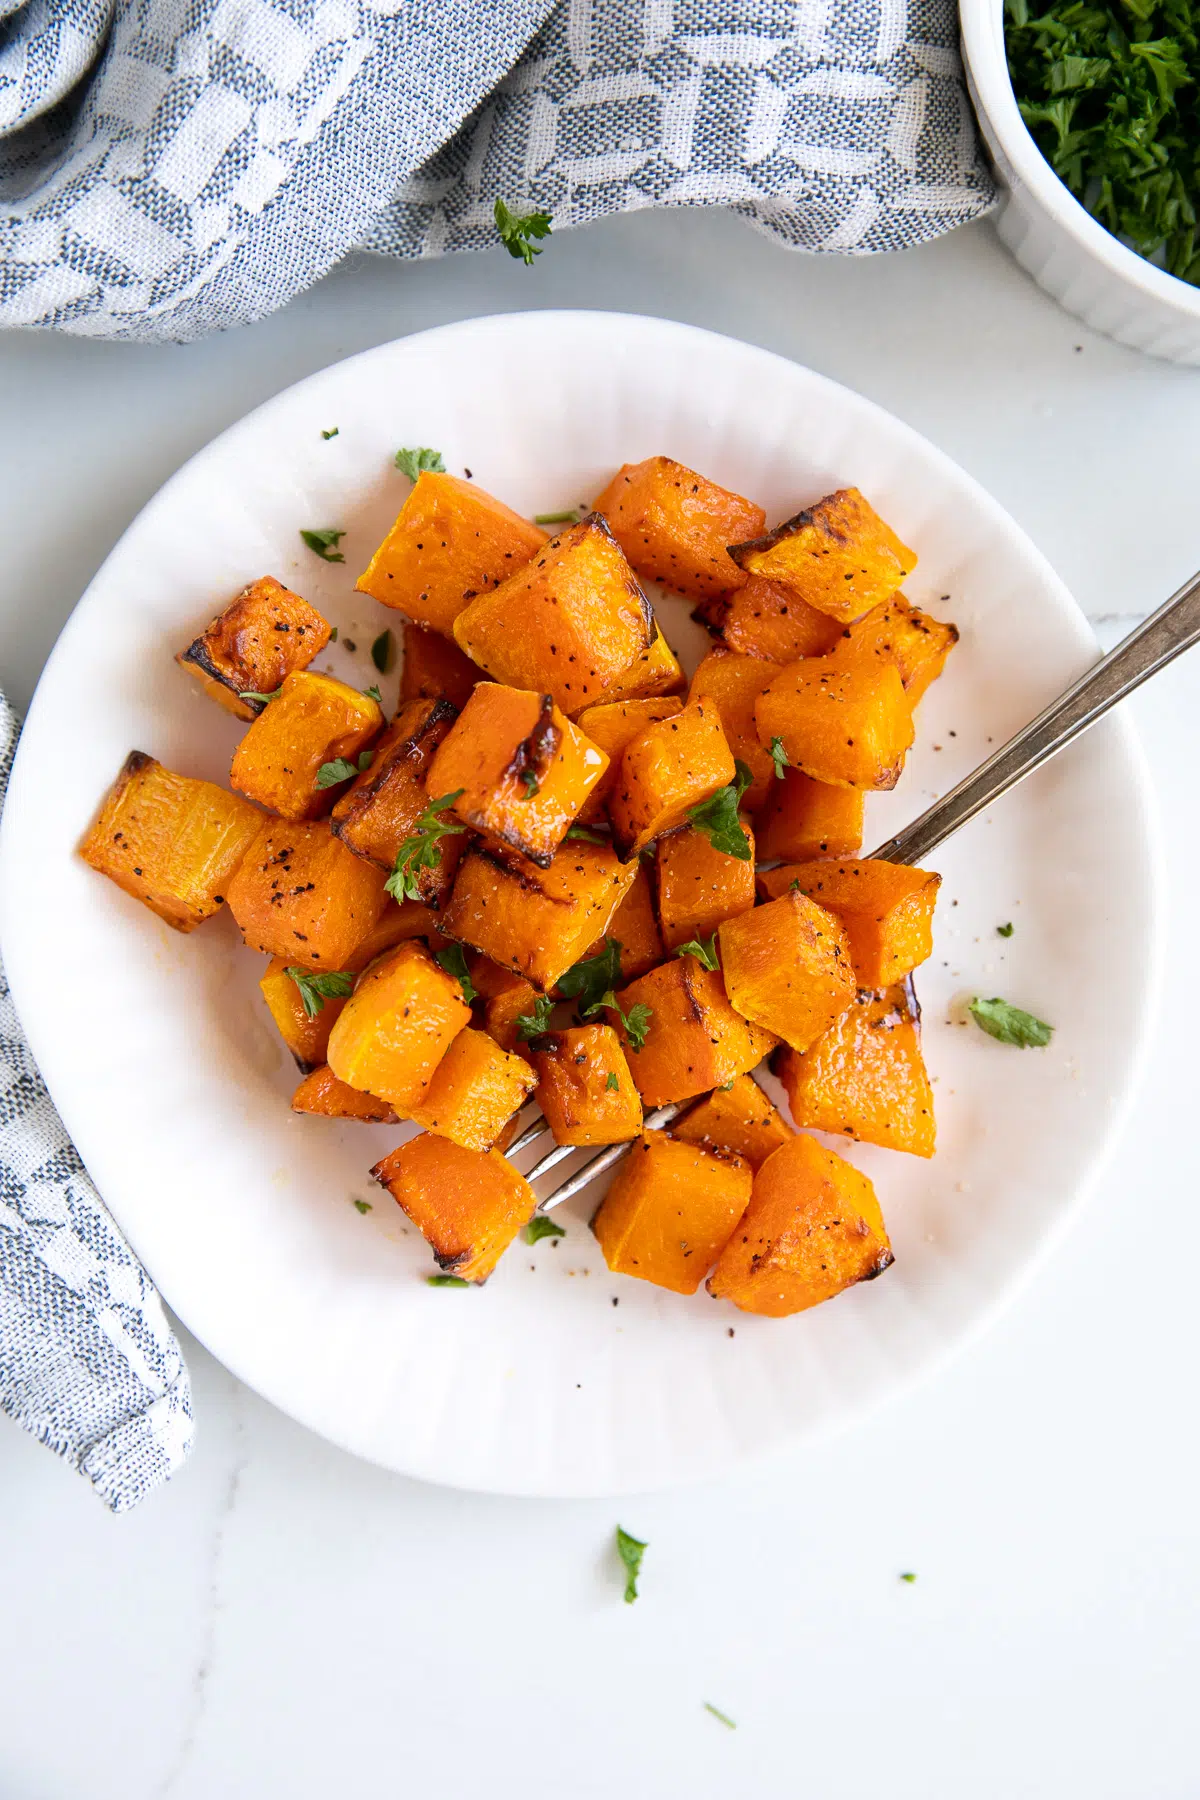 White plate filled with tender cubes of butternut squash cooked in the air fryer and garnished with chopped parsley.